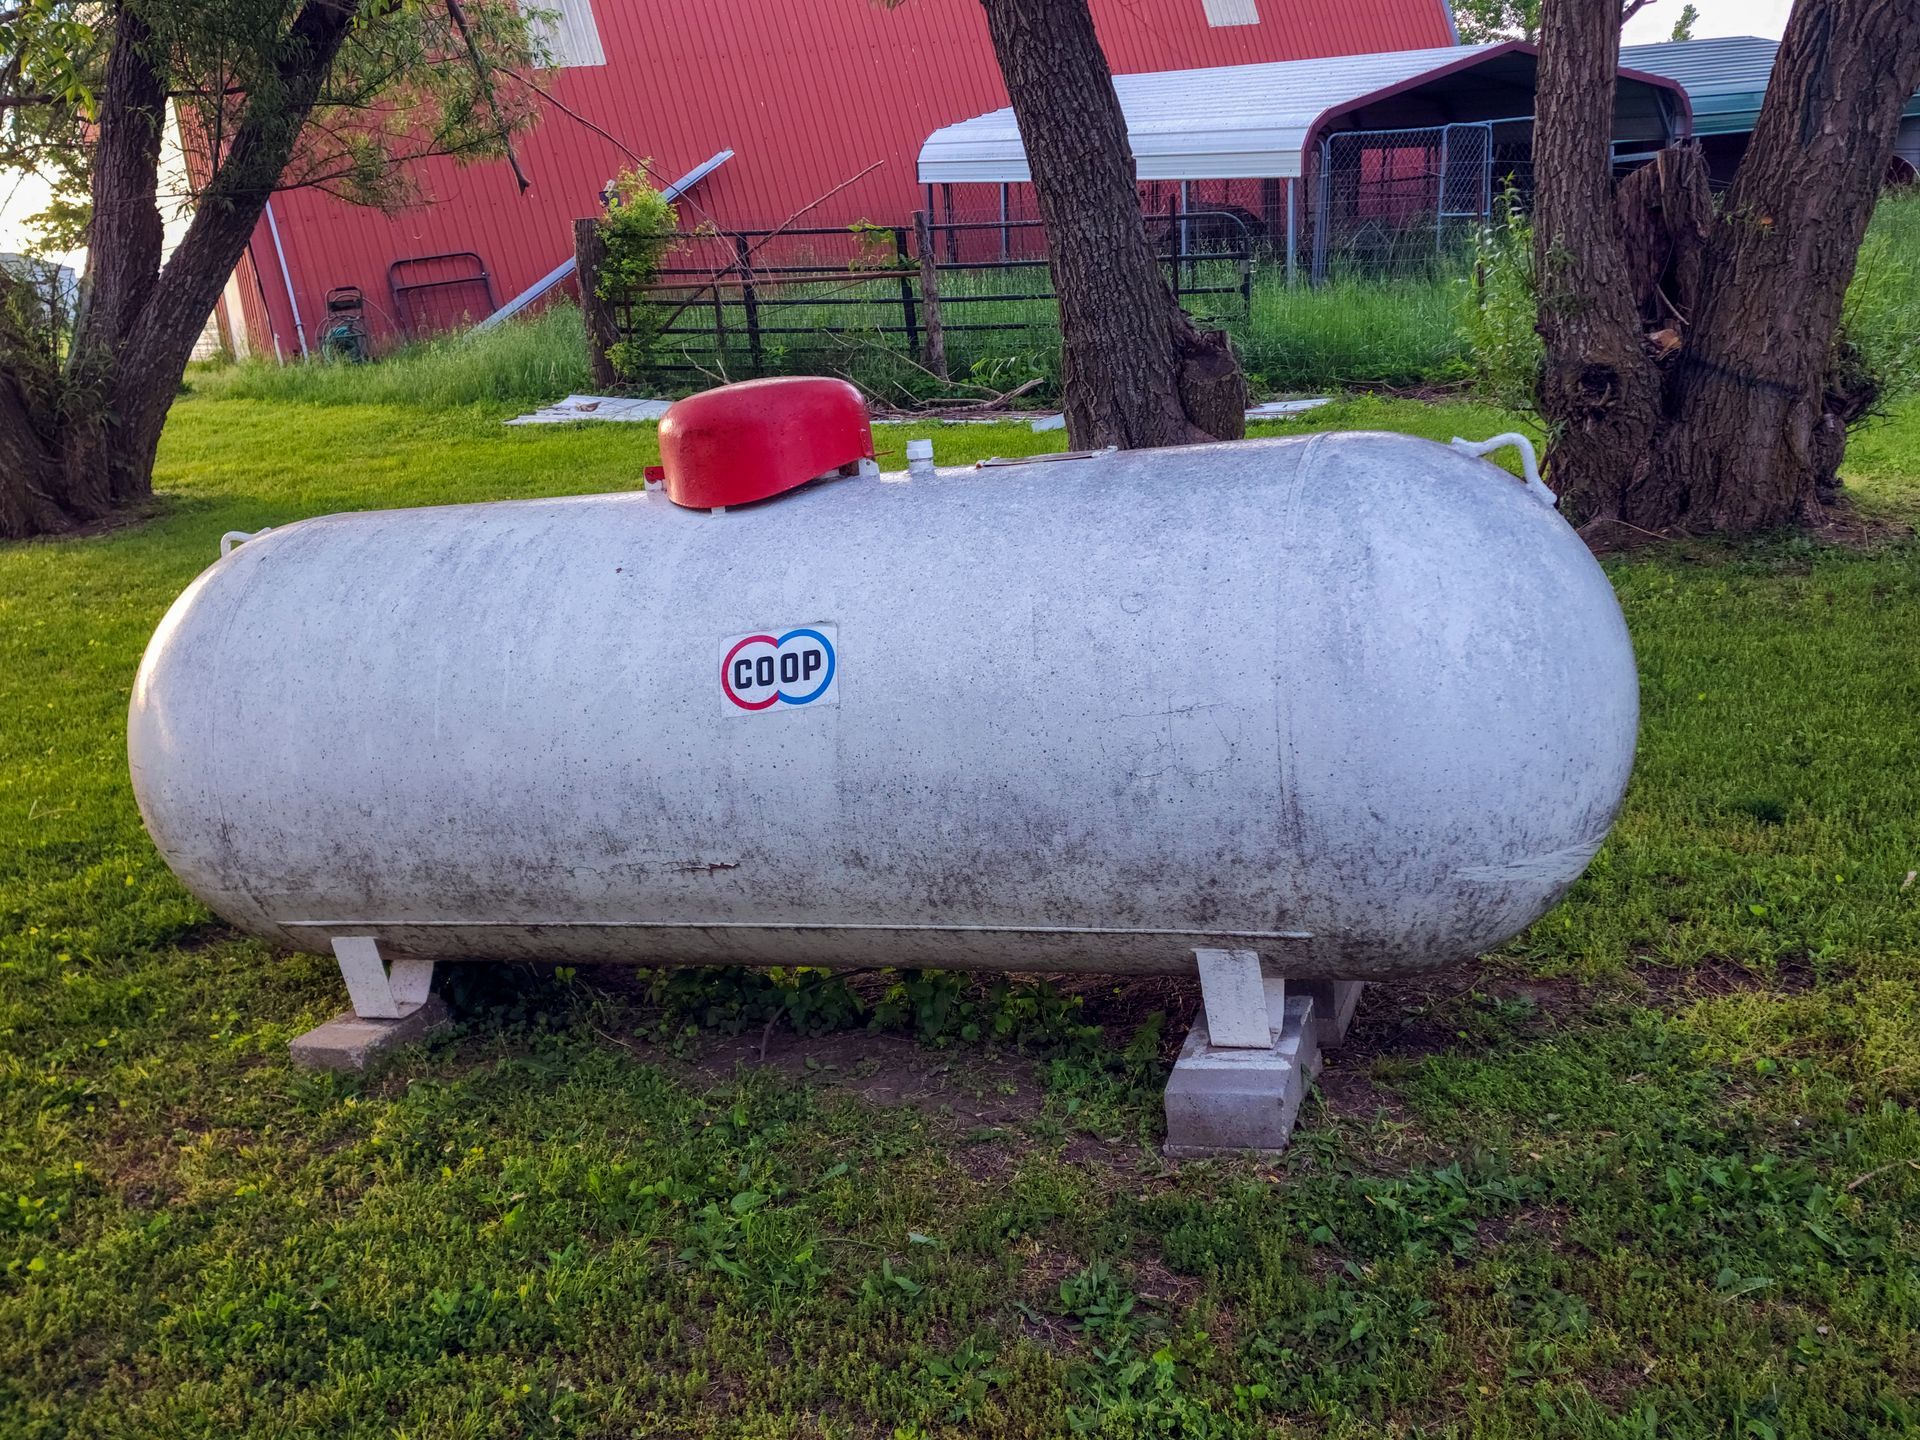 Propane tanks like the one pictured can experience in in extreme cold weather.